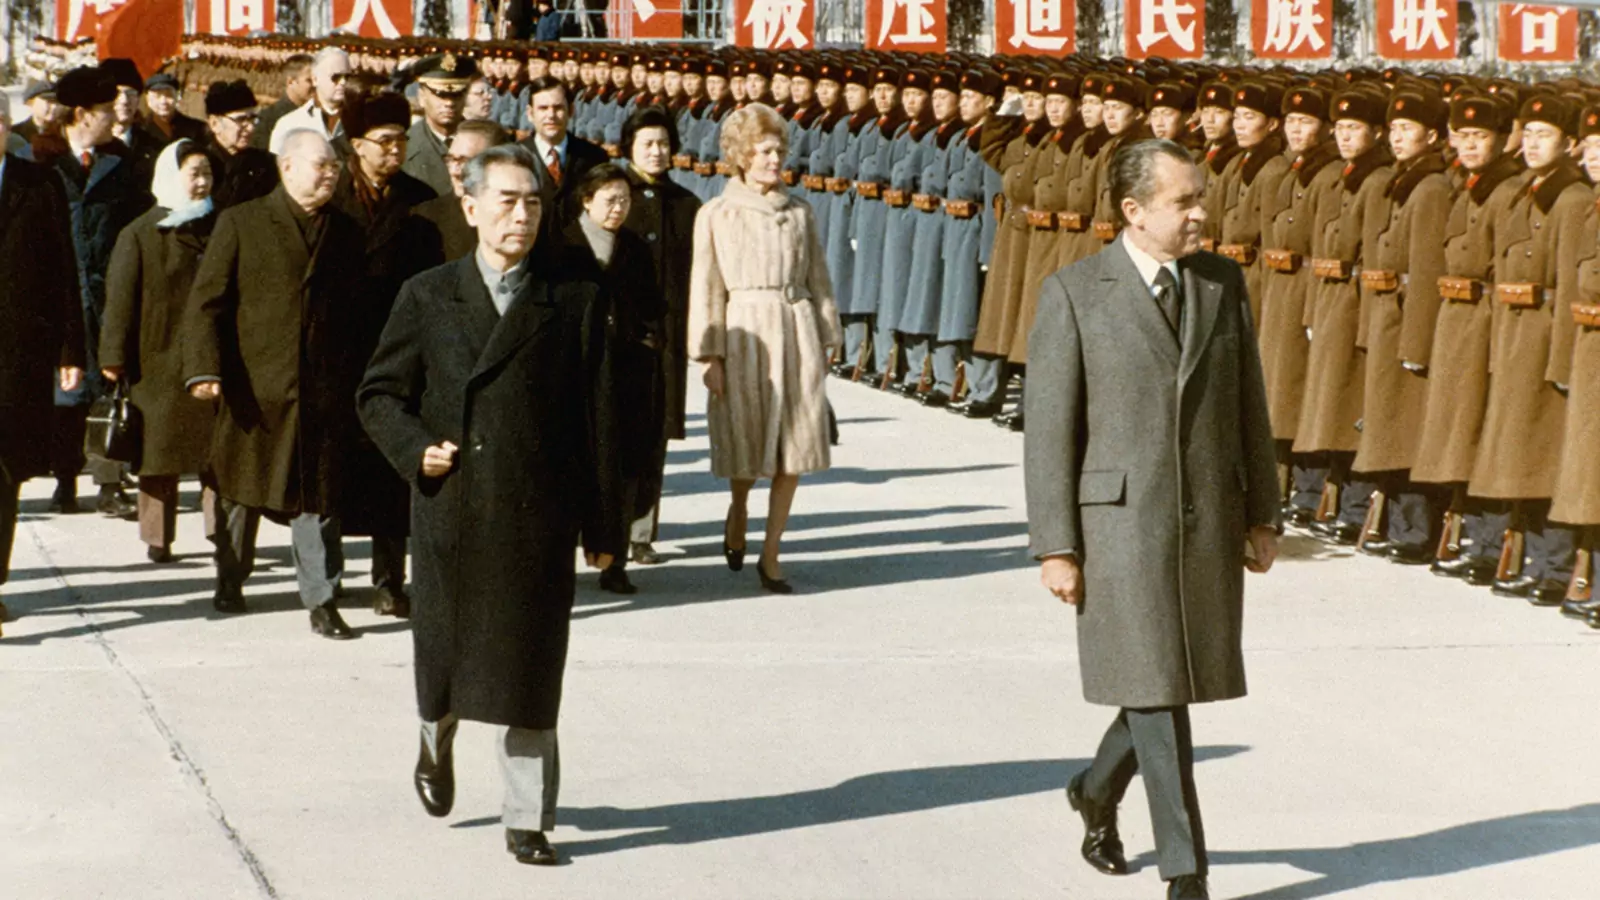 President Nixon inspects assembled Chinese soldiers with Premier Zhou Enlai.